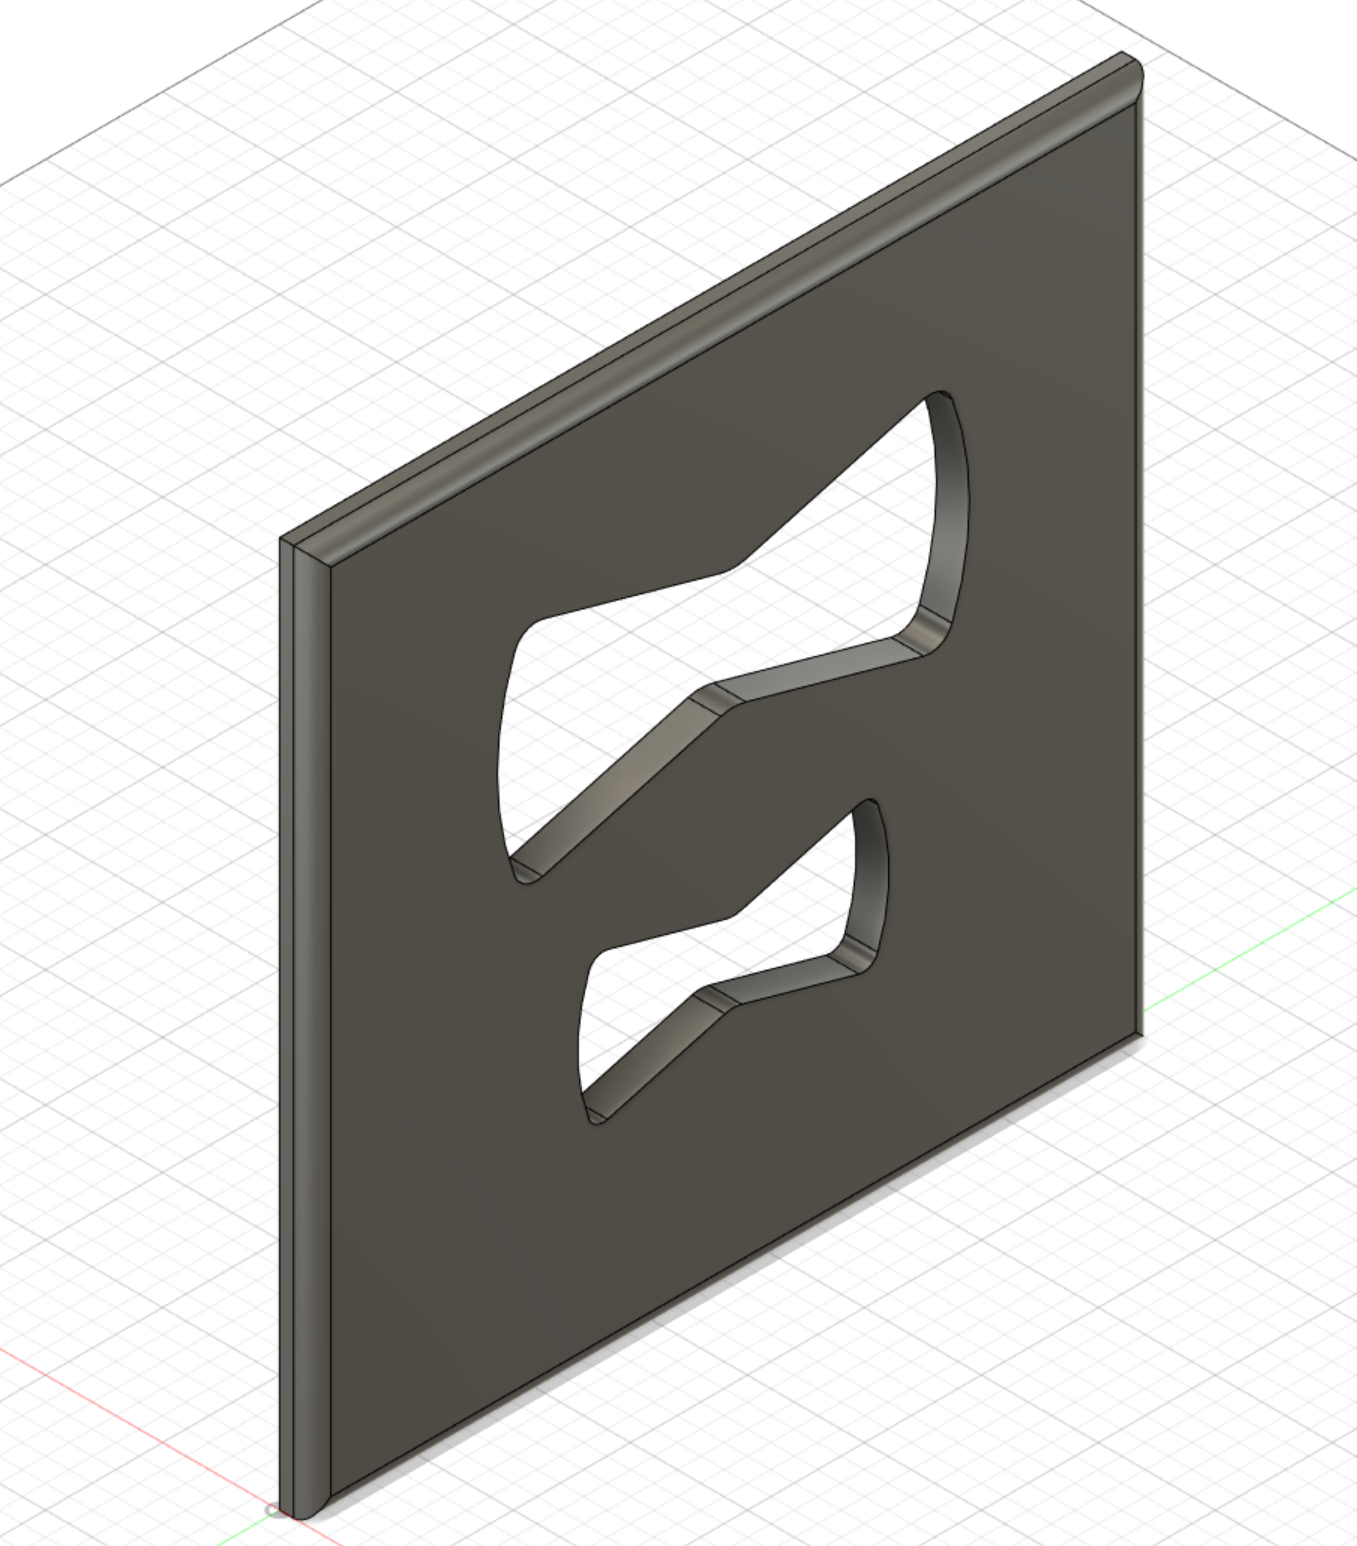 Butterfly or Bowtie Router Inlay Template by crashkg Download free